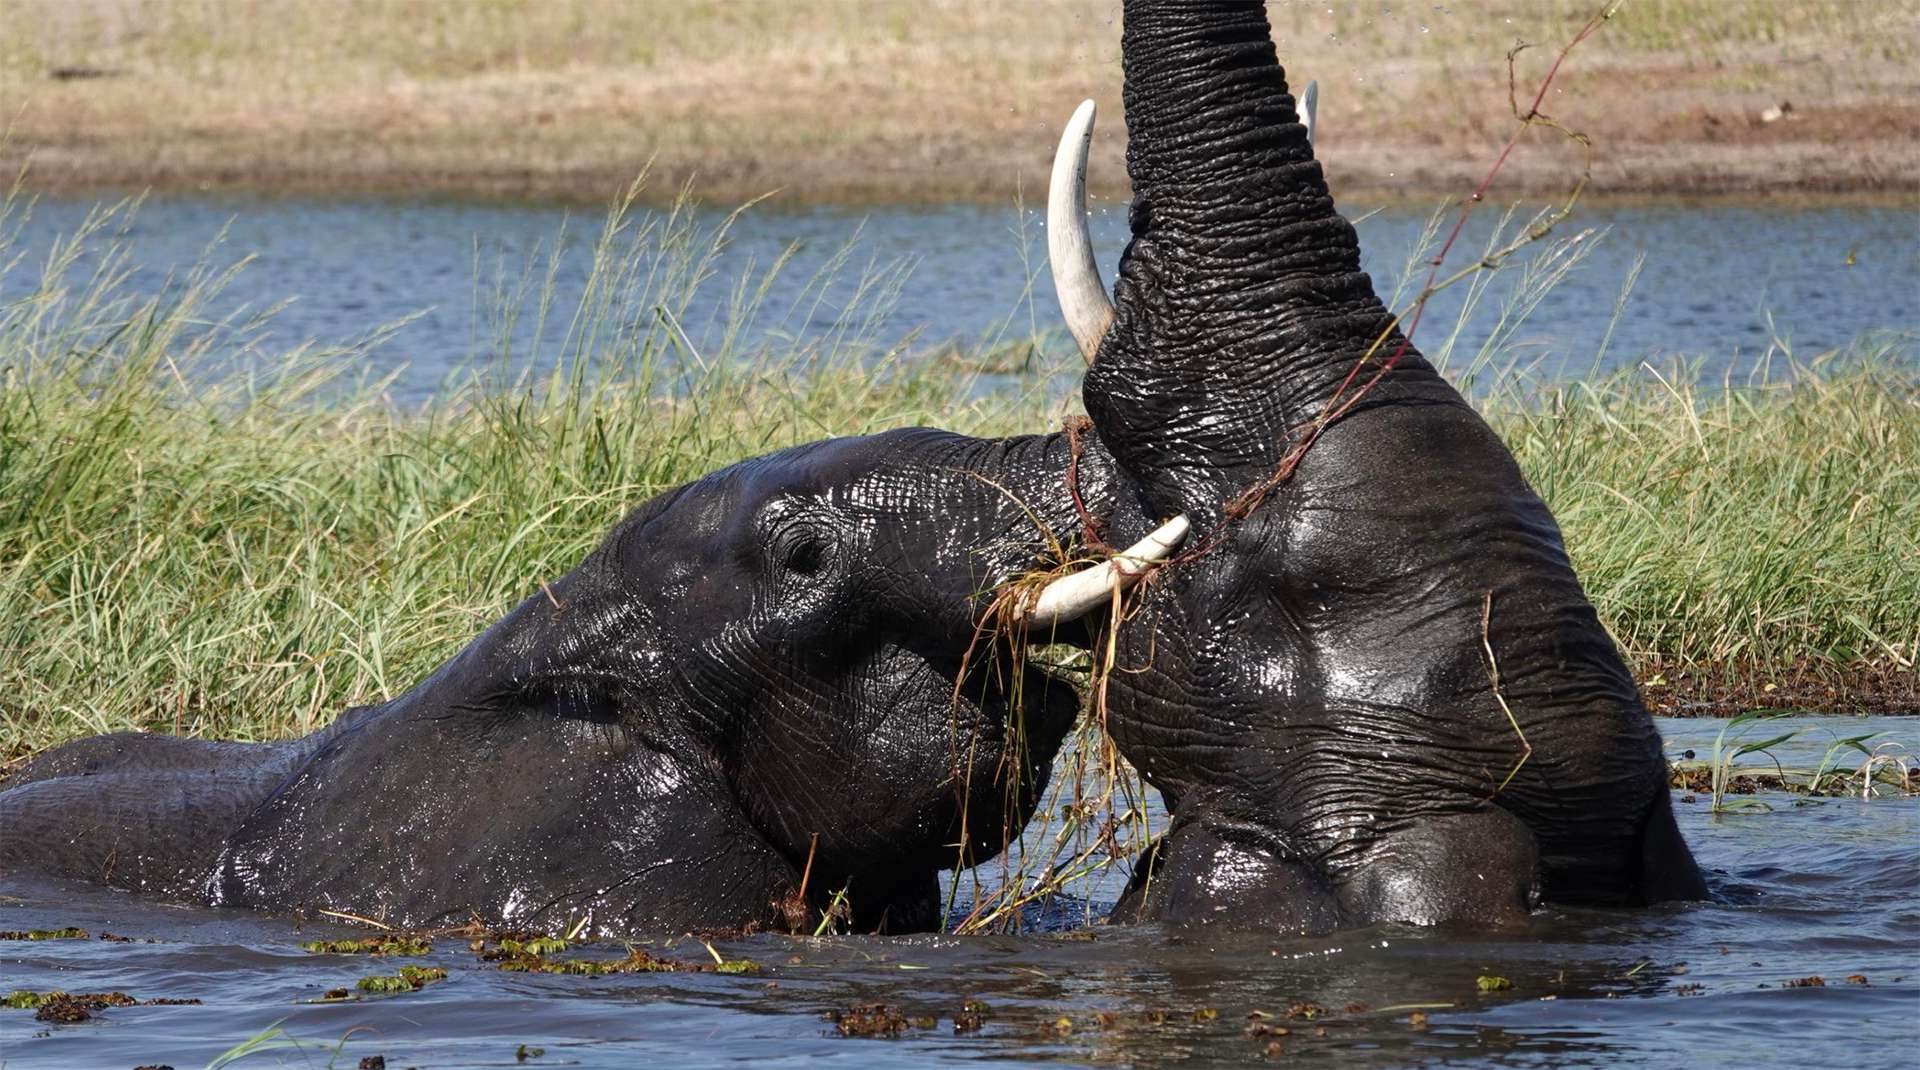 Two elephants playing and fighting in the waters of Botswana with tusks and trunks in the air